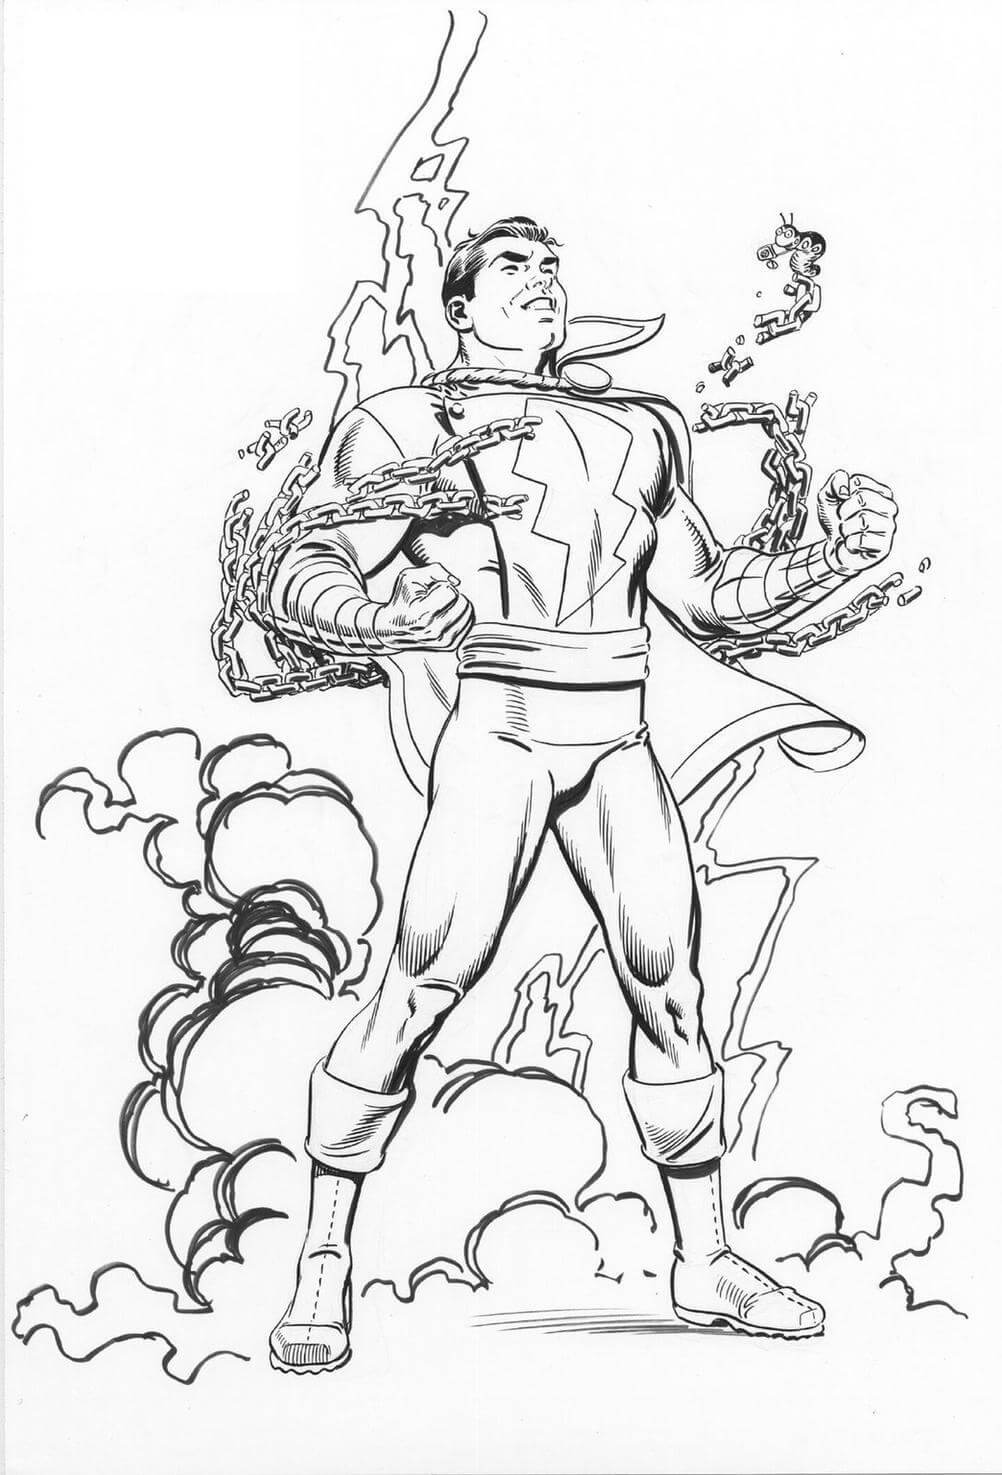 ﻿Shazam Coloring Pages - Home > coloring pages > coloring pages shazam